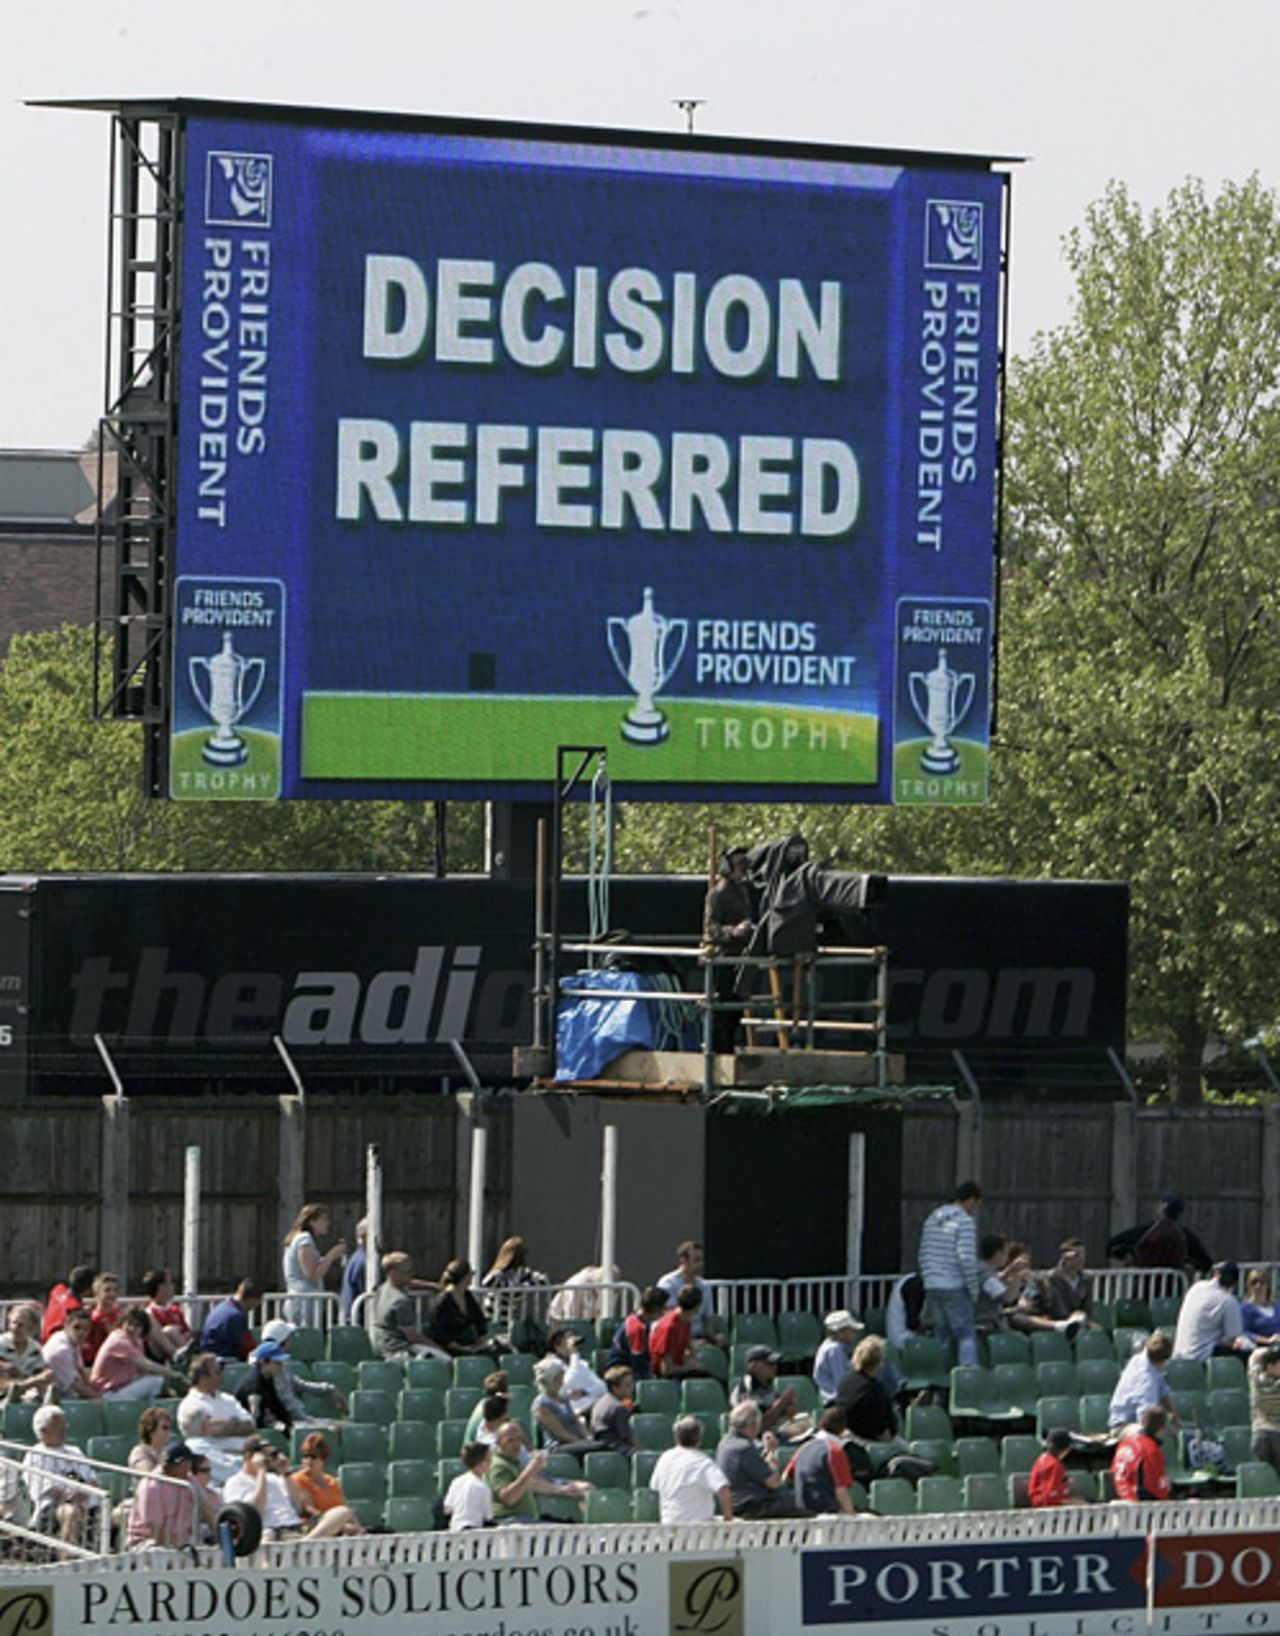 The first referral by a player to the third umpire is made at Taunton, Somerset v Sussex, Friends Provident Trophy, Taunton, April 29, 2007